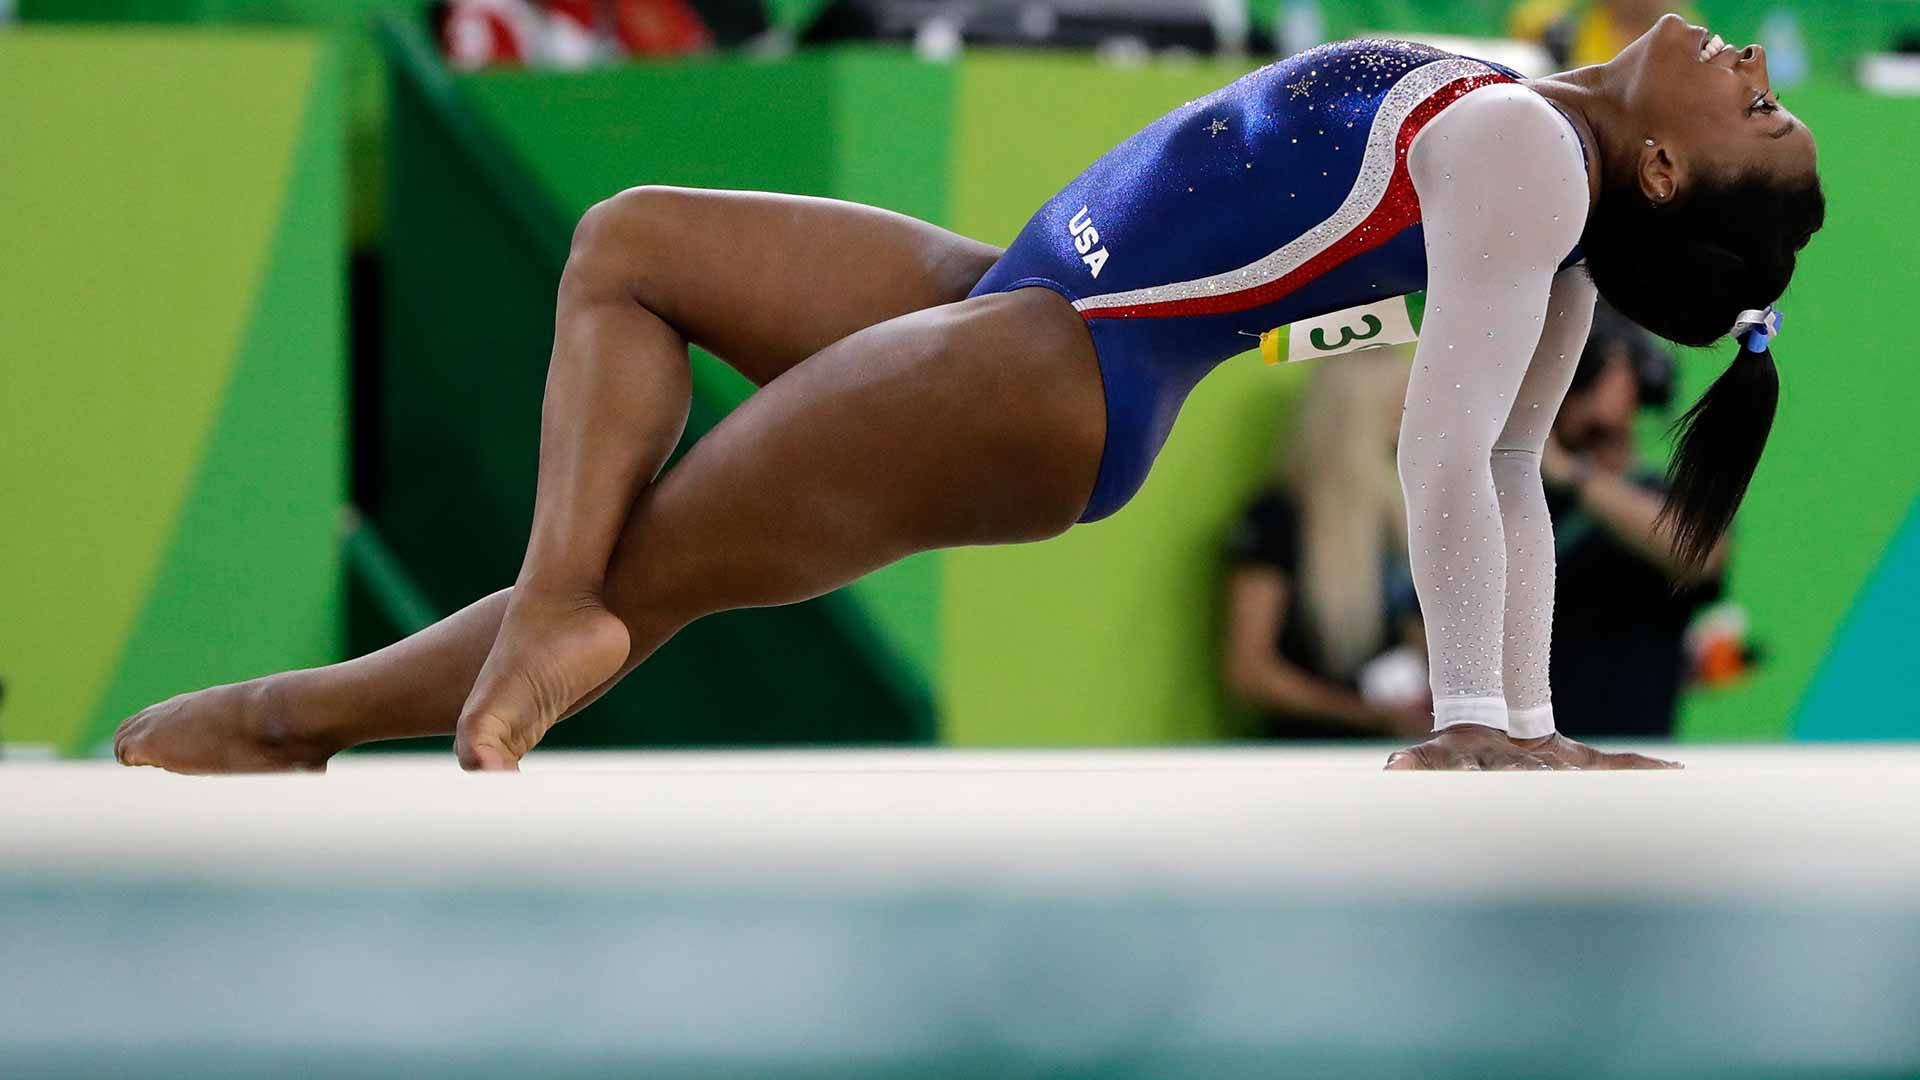 Olympic Gold Medalist Simone Biles At The 2017 World Championships. Background